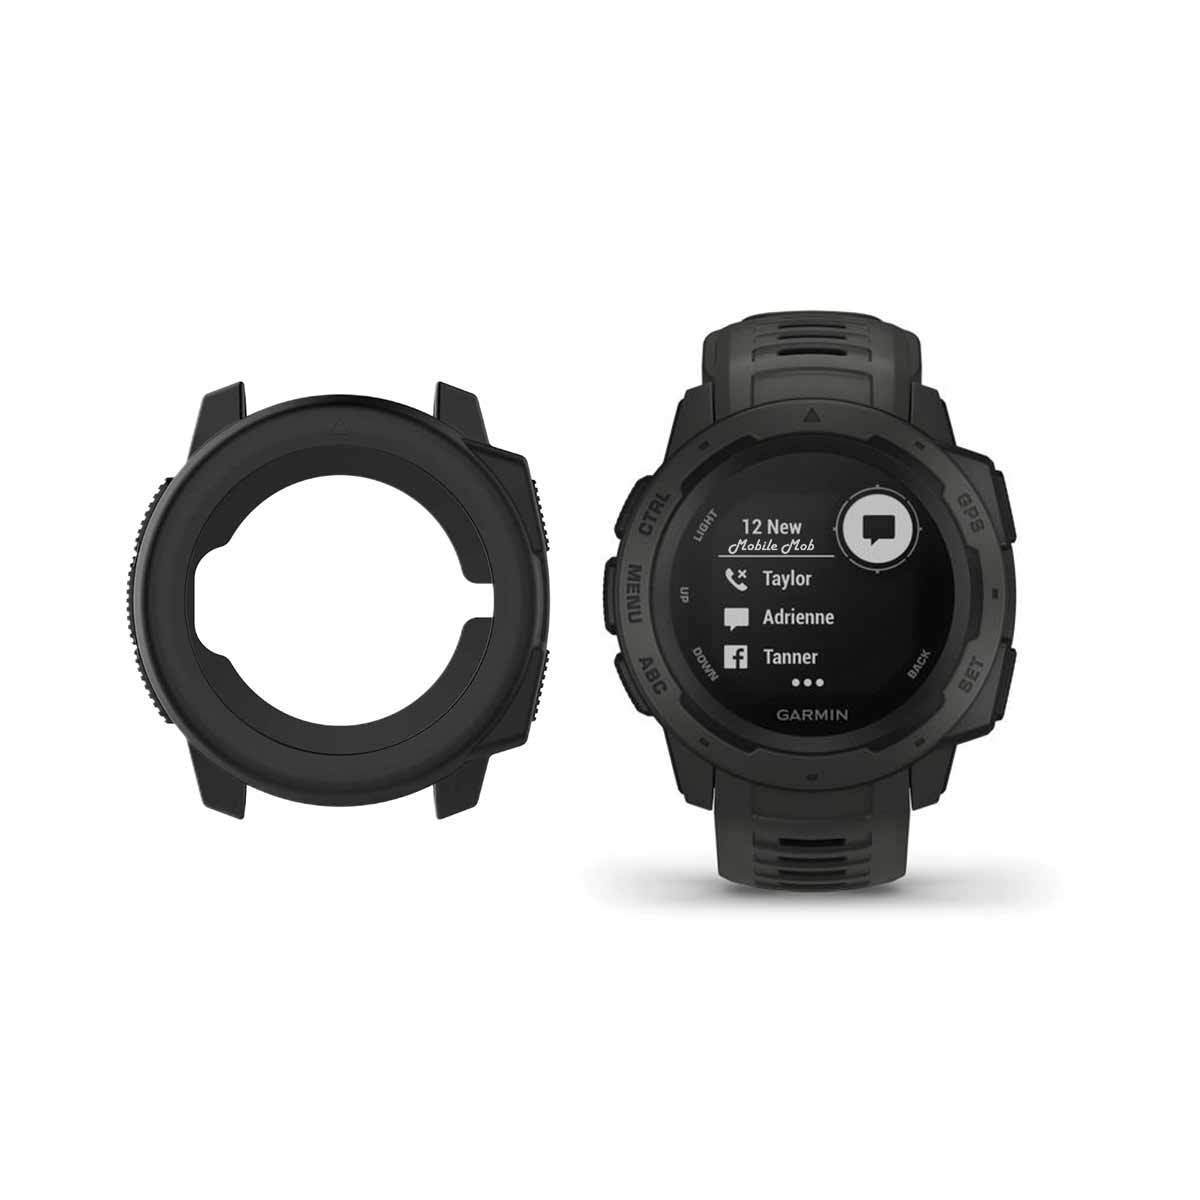 For Garmin Venu 3 Shockproof High Quality Watch Case with Protective Glass